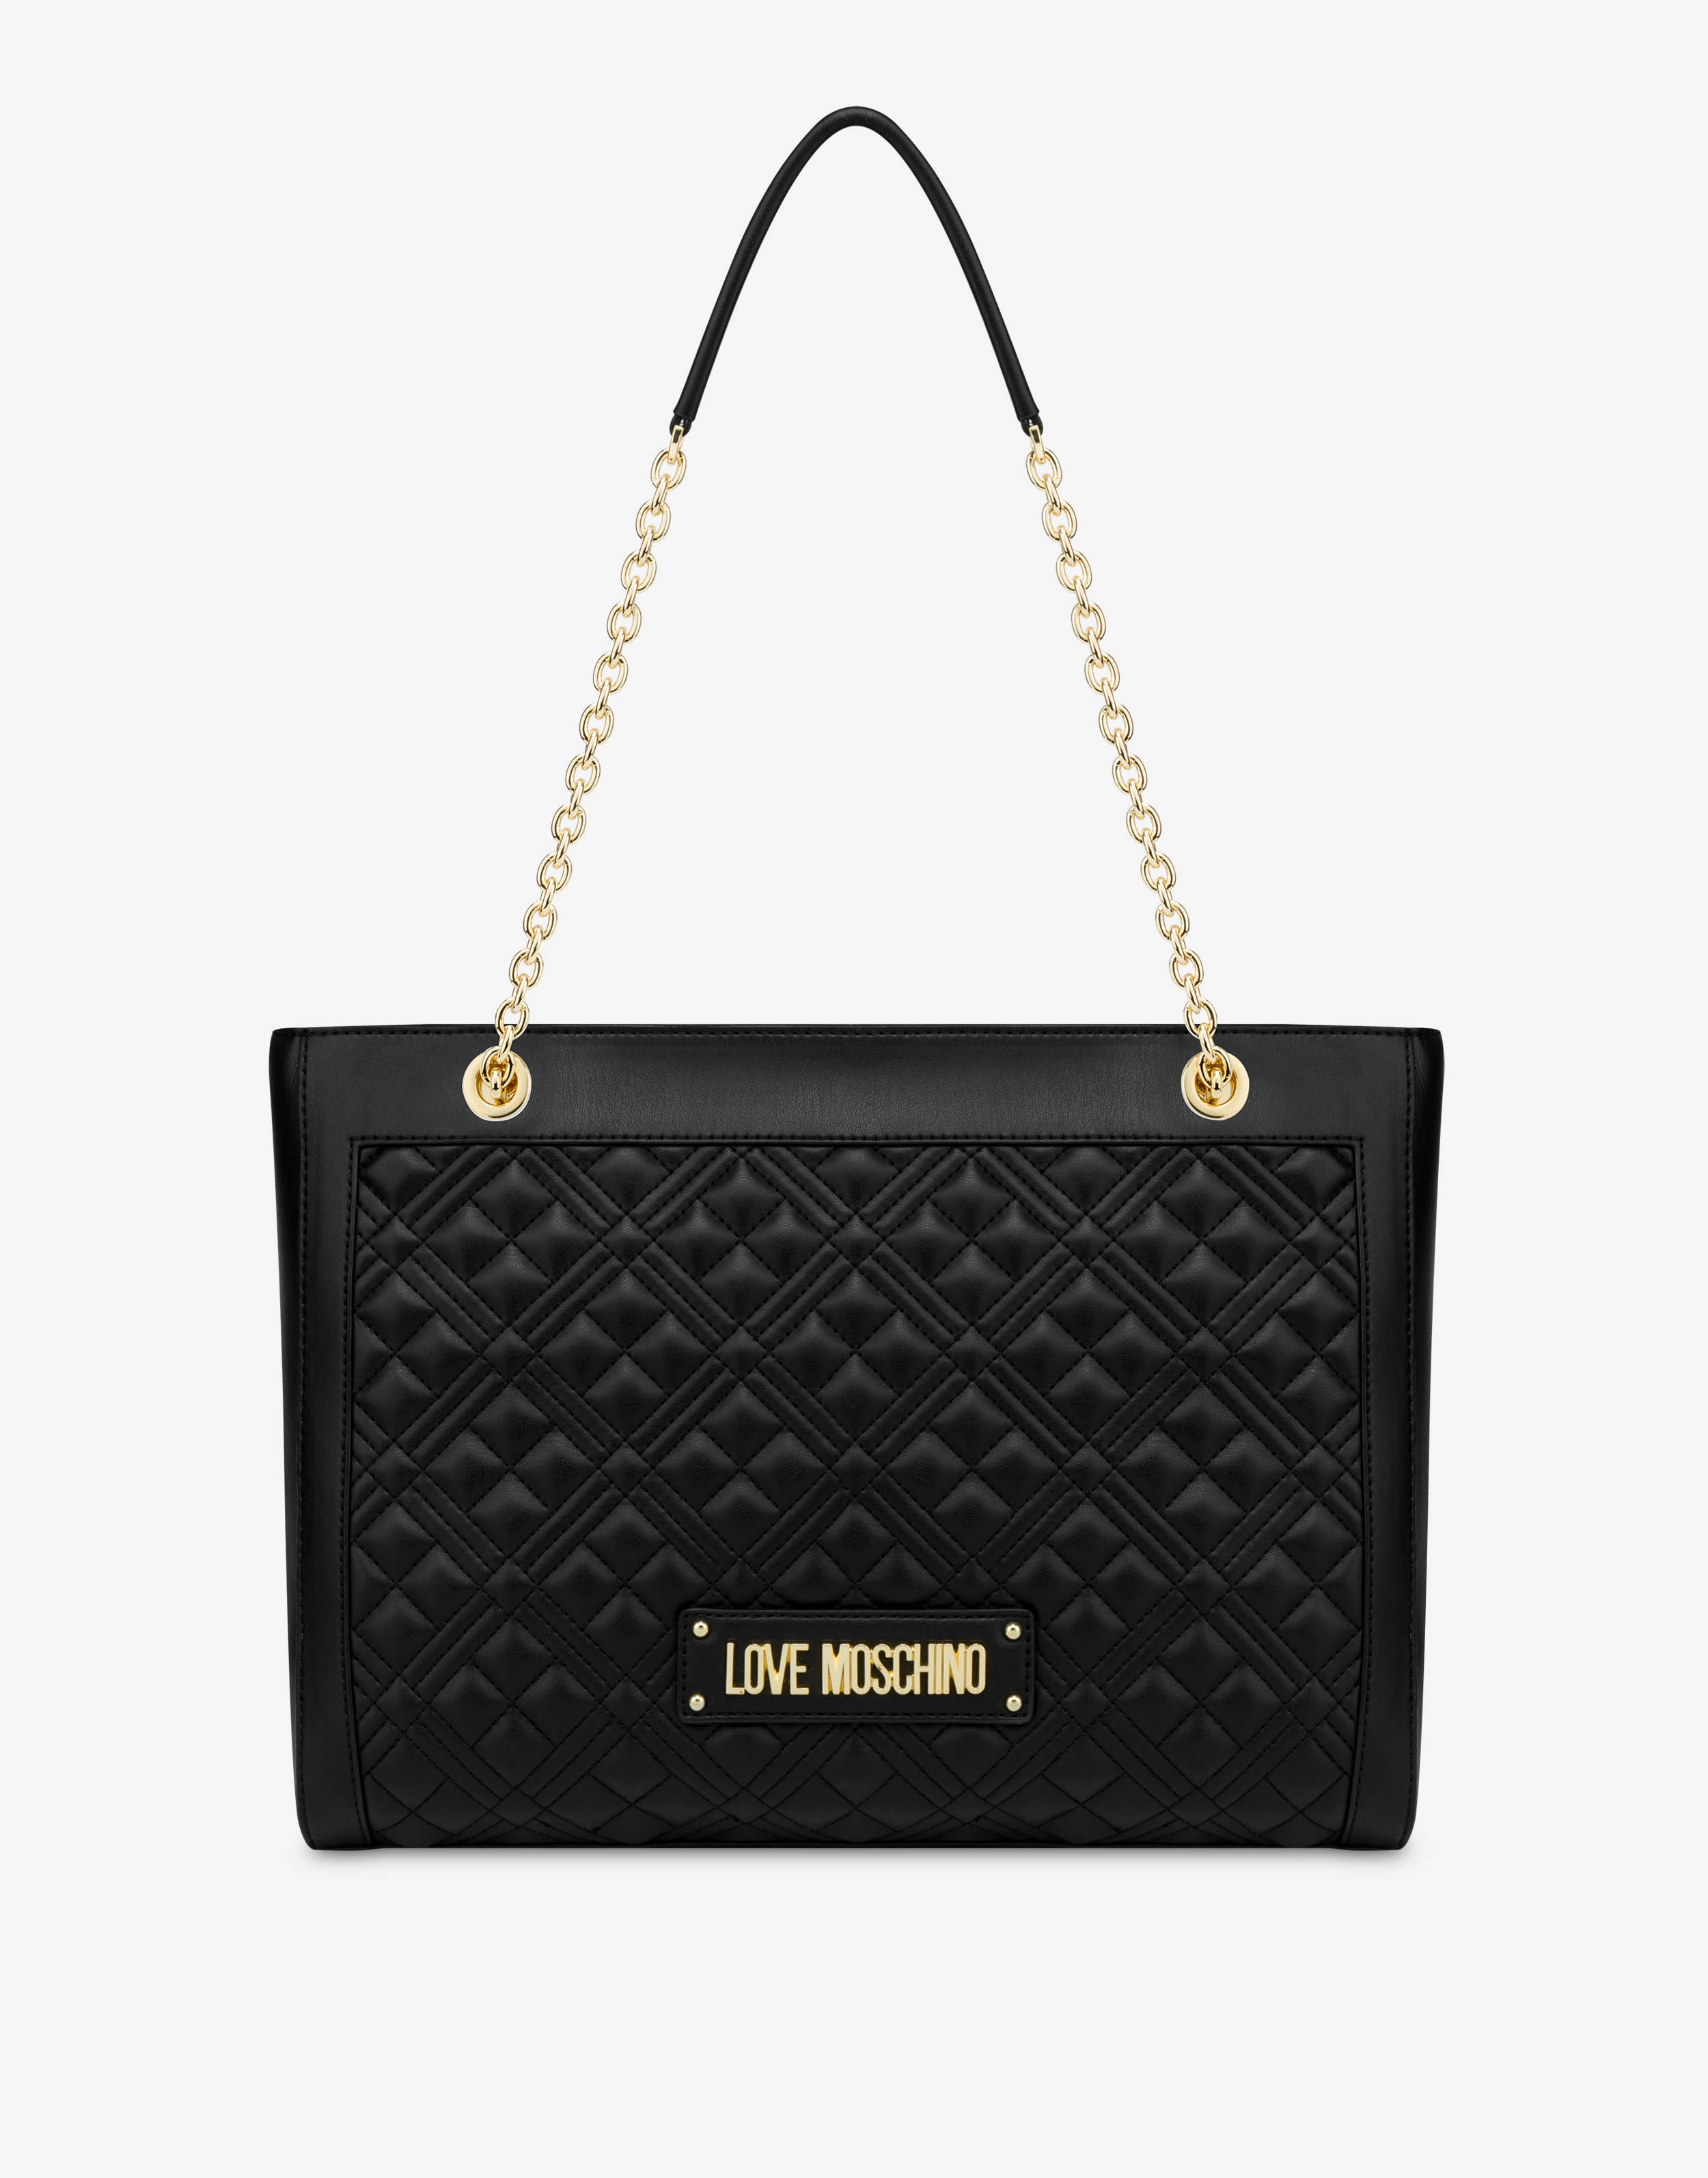 Love Moschino Bags for New Season - Official Store